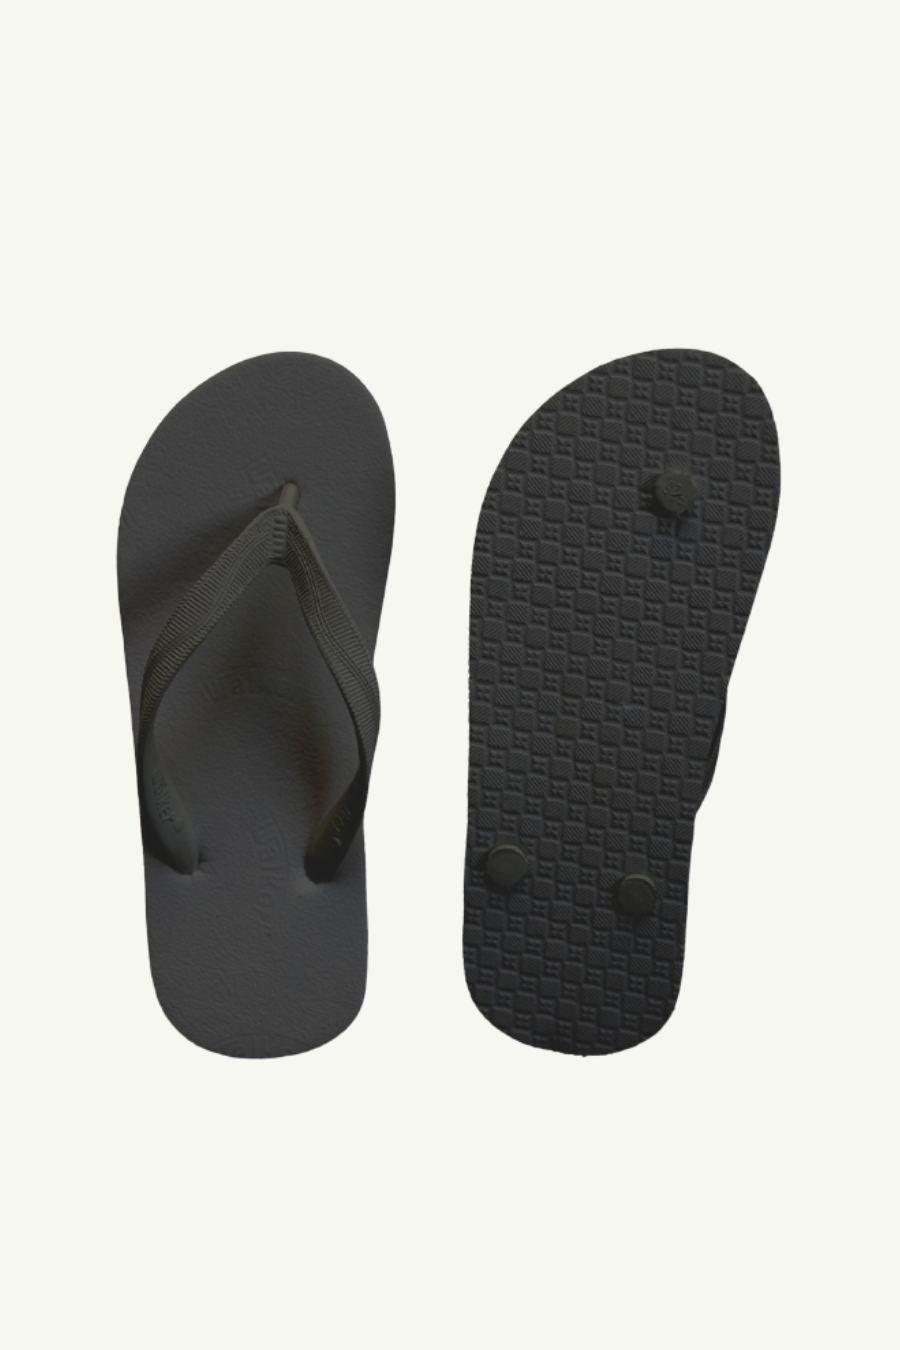 Our Rubber Slippers in Black – Neat Nanny